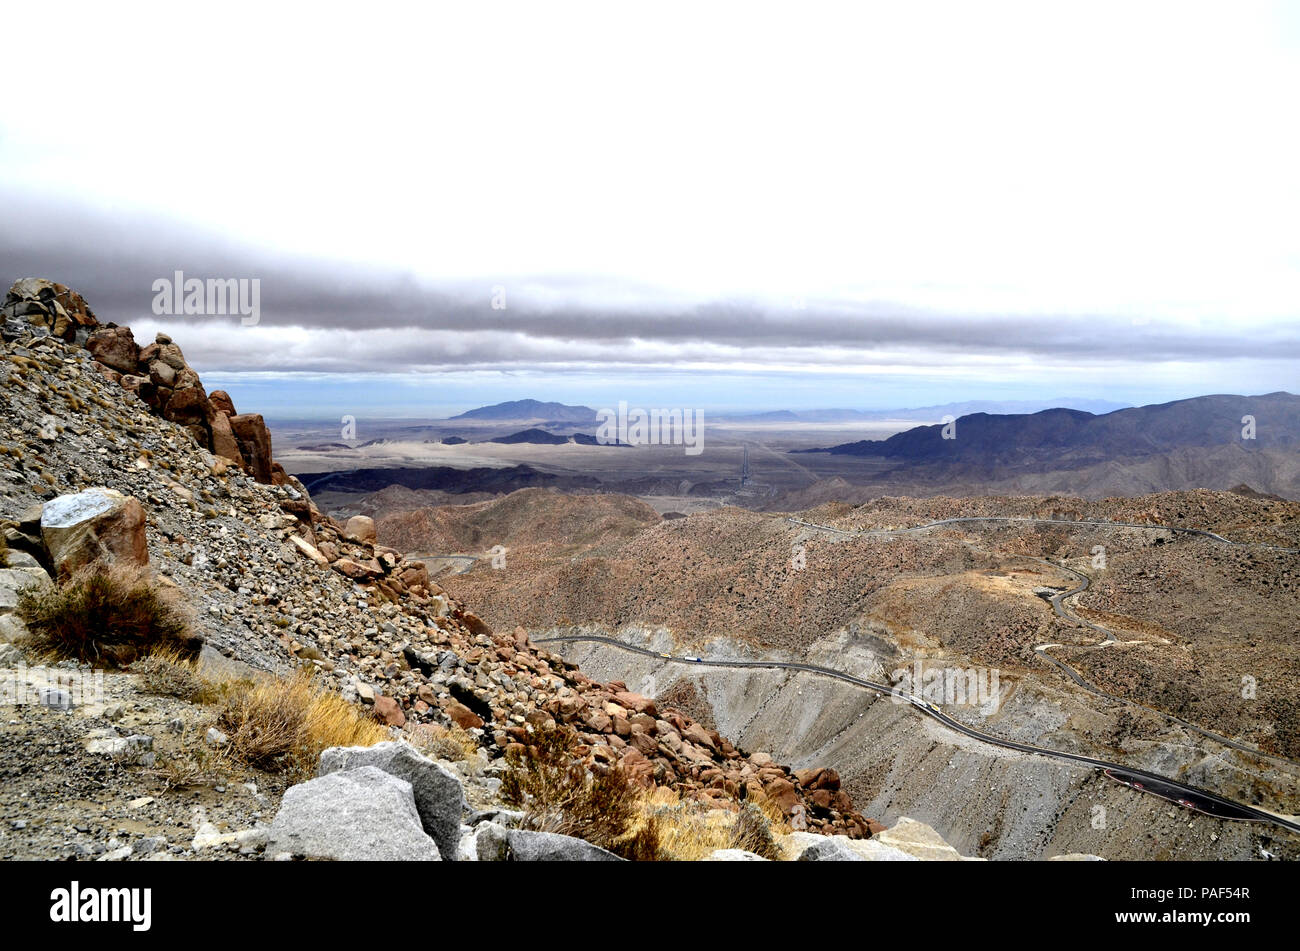 View of the Mexicali Valley and El Centinela (Mt. Signal) from the Tijuana-Mexicali Highway near in La Rumorosa, Baja California, Mexico. Stock Photo